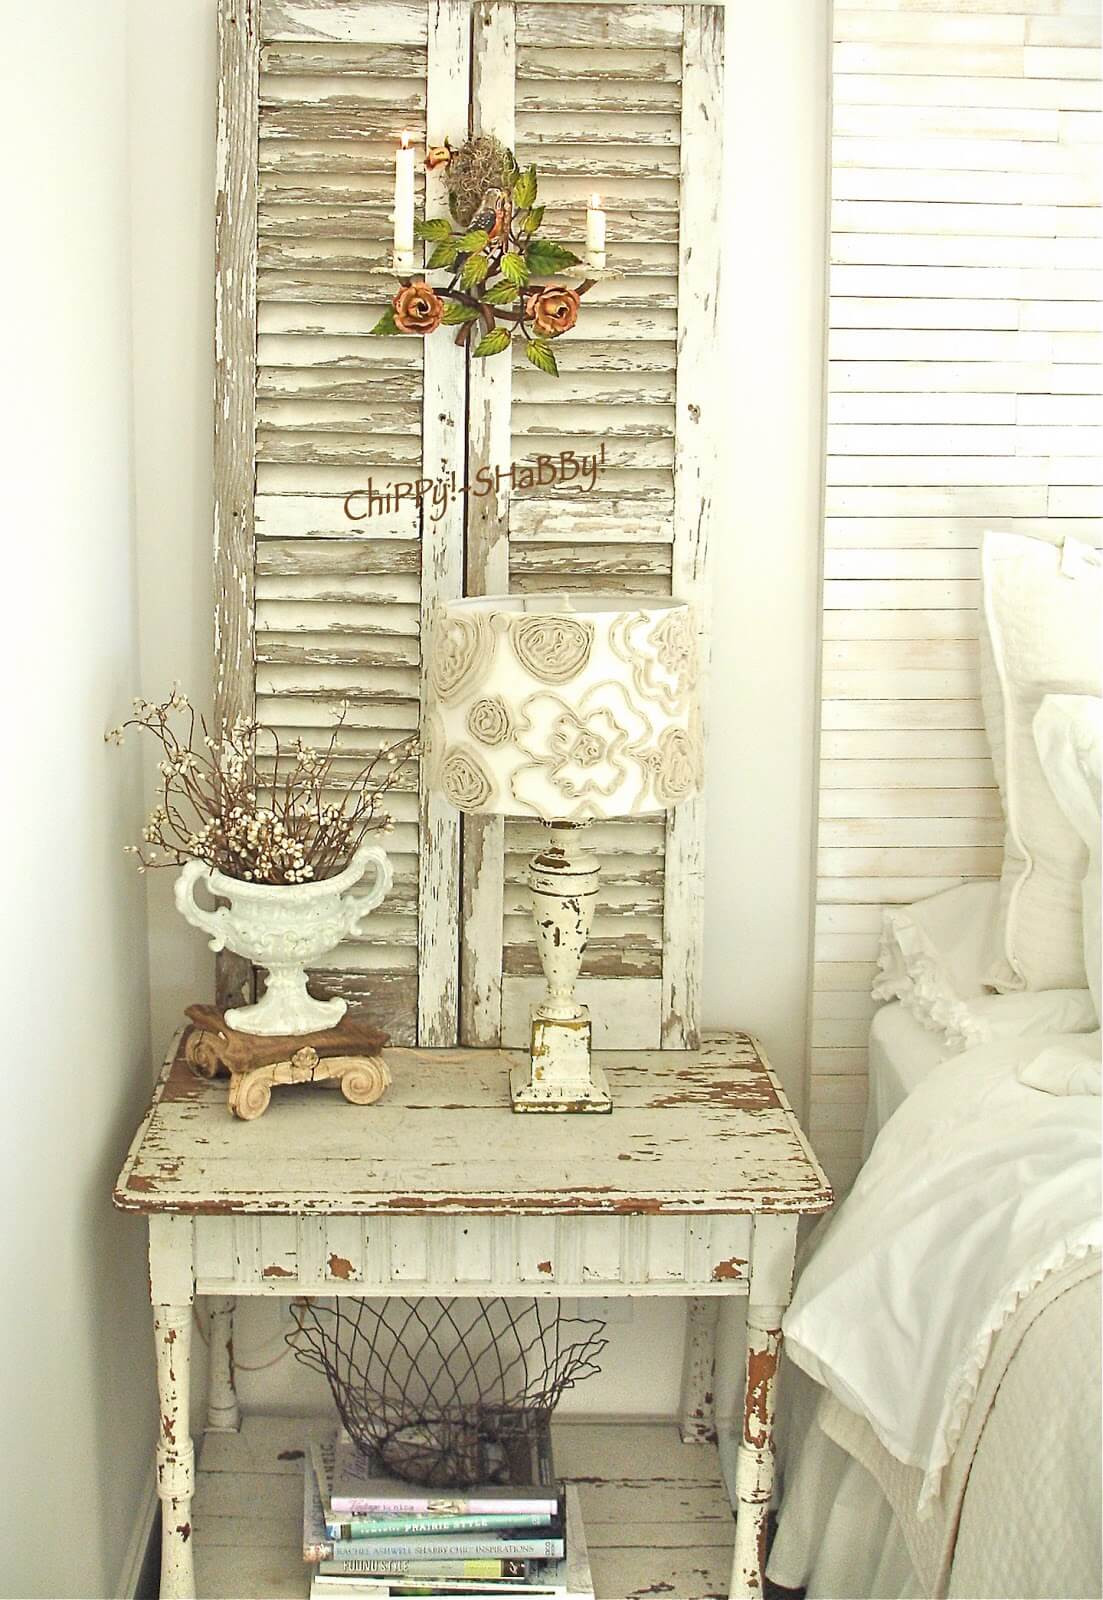 Shabby Chic Bedroom Accessories
 35 Best Shabby Chic Bedroom Design and Decor Ideas for 2017